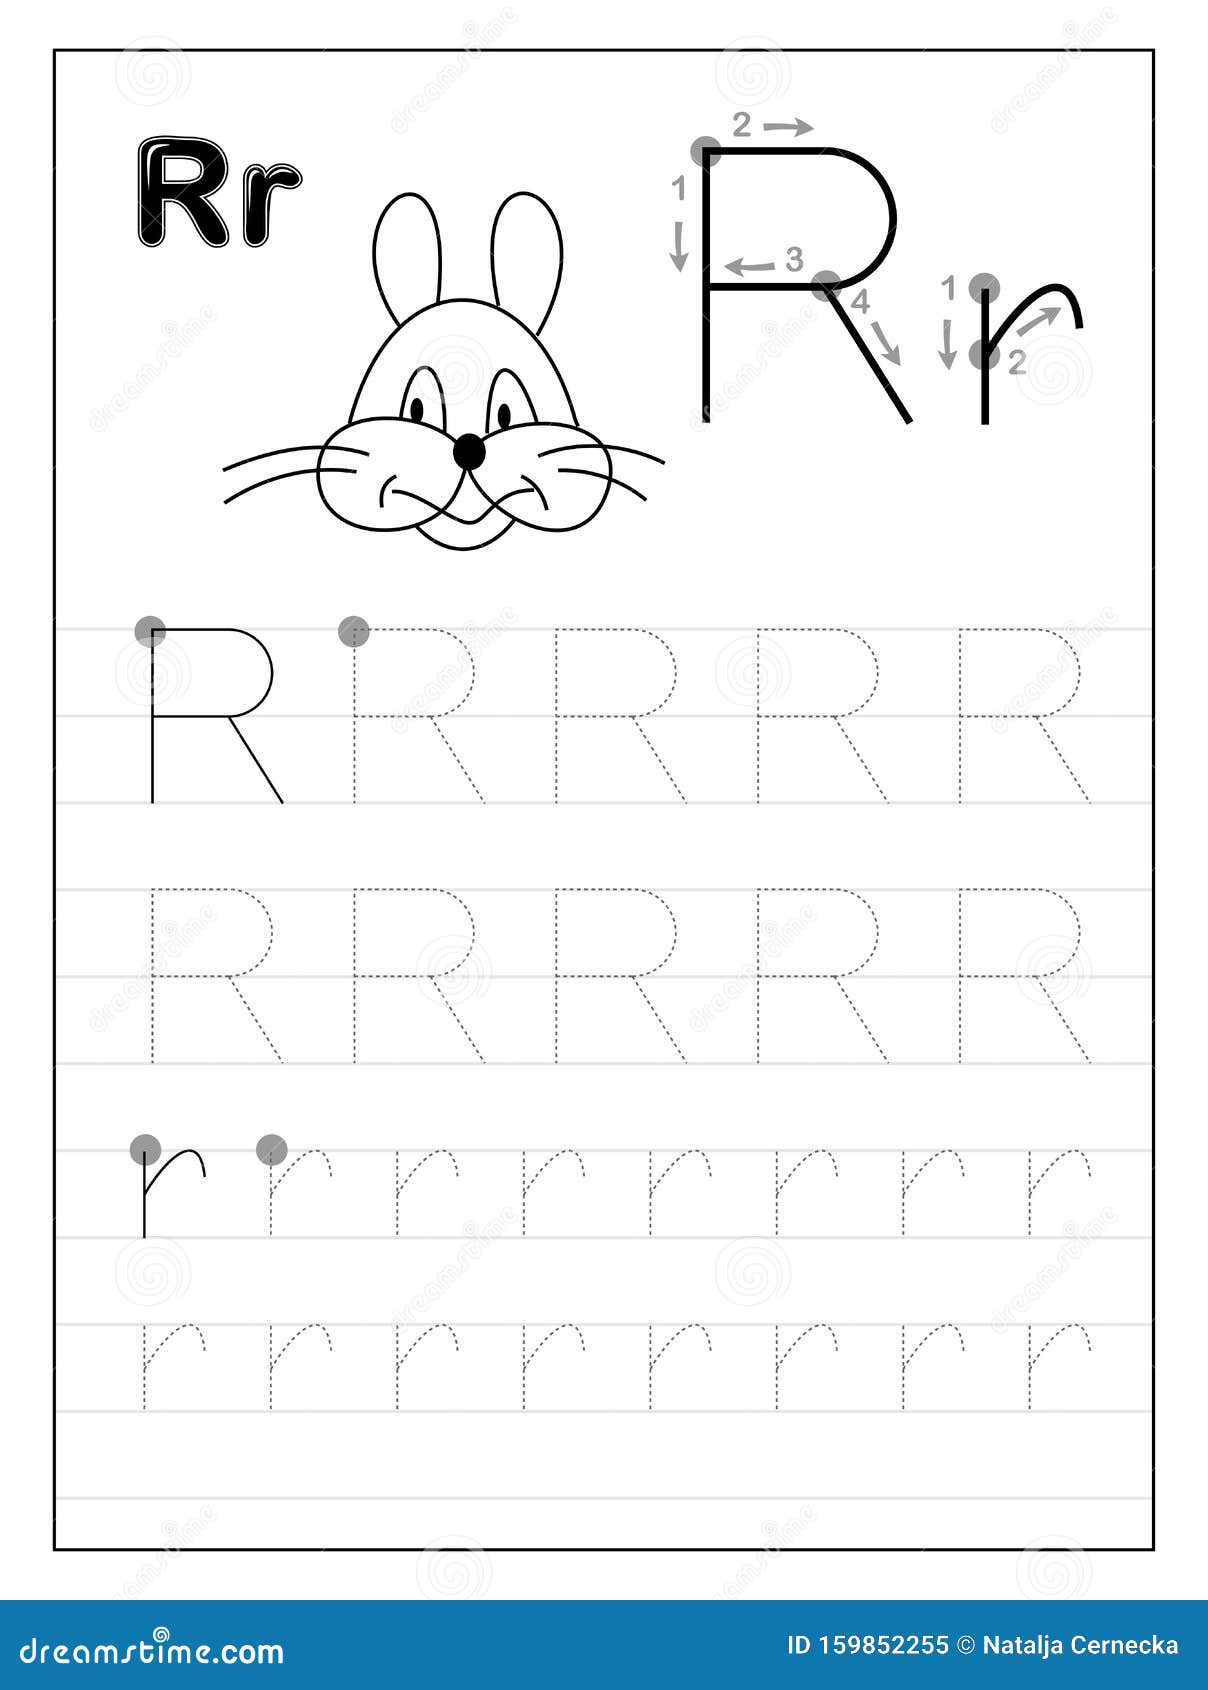 tracing alphabet letter r black and white educational pages on line for kids printable worksheet for children textbook stock vector illustration of educational capital 159852255